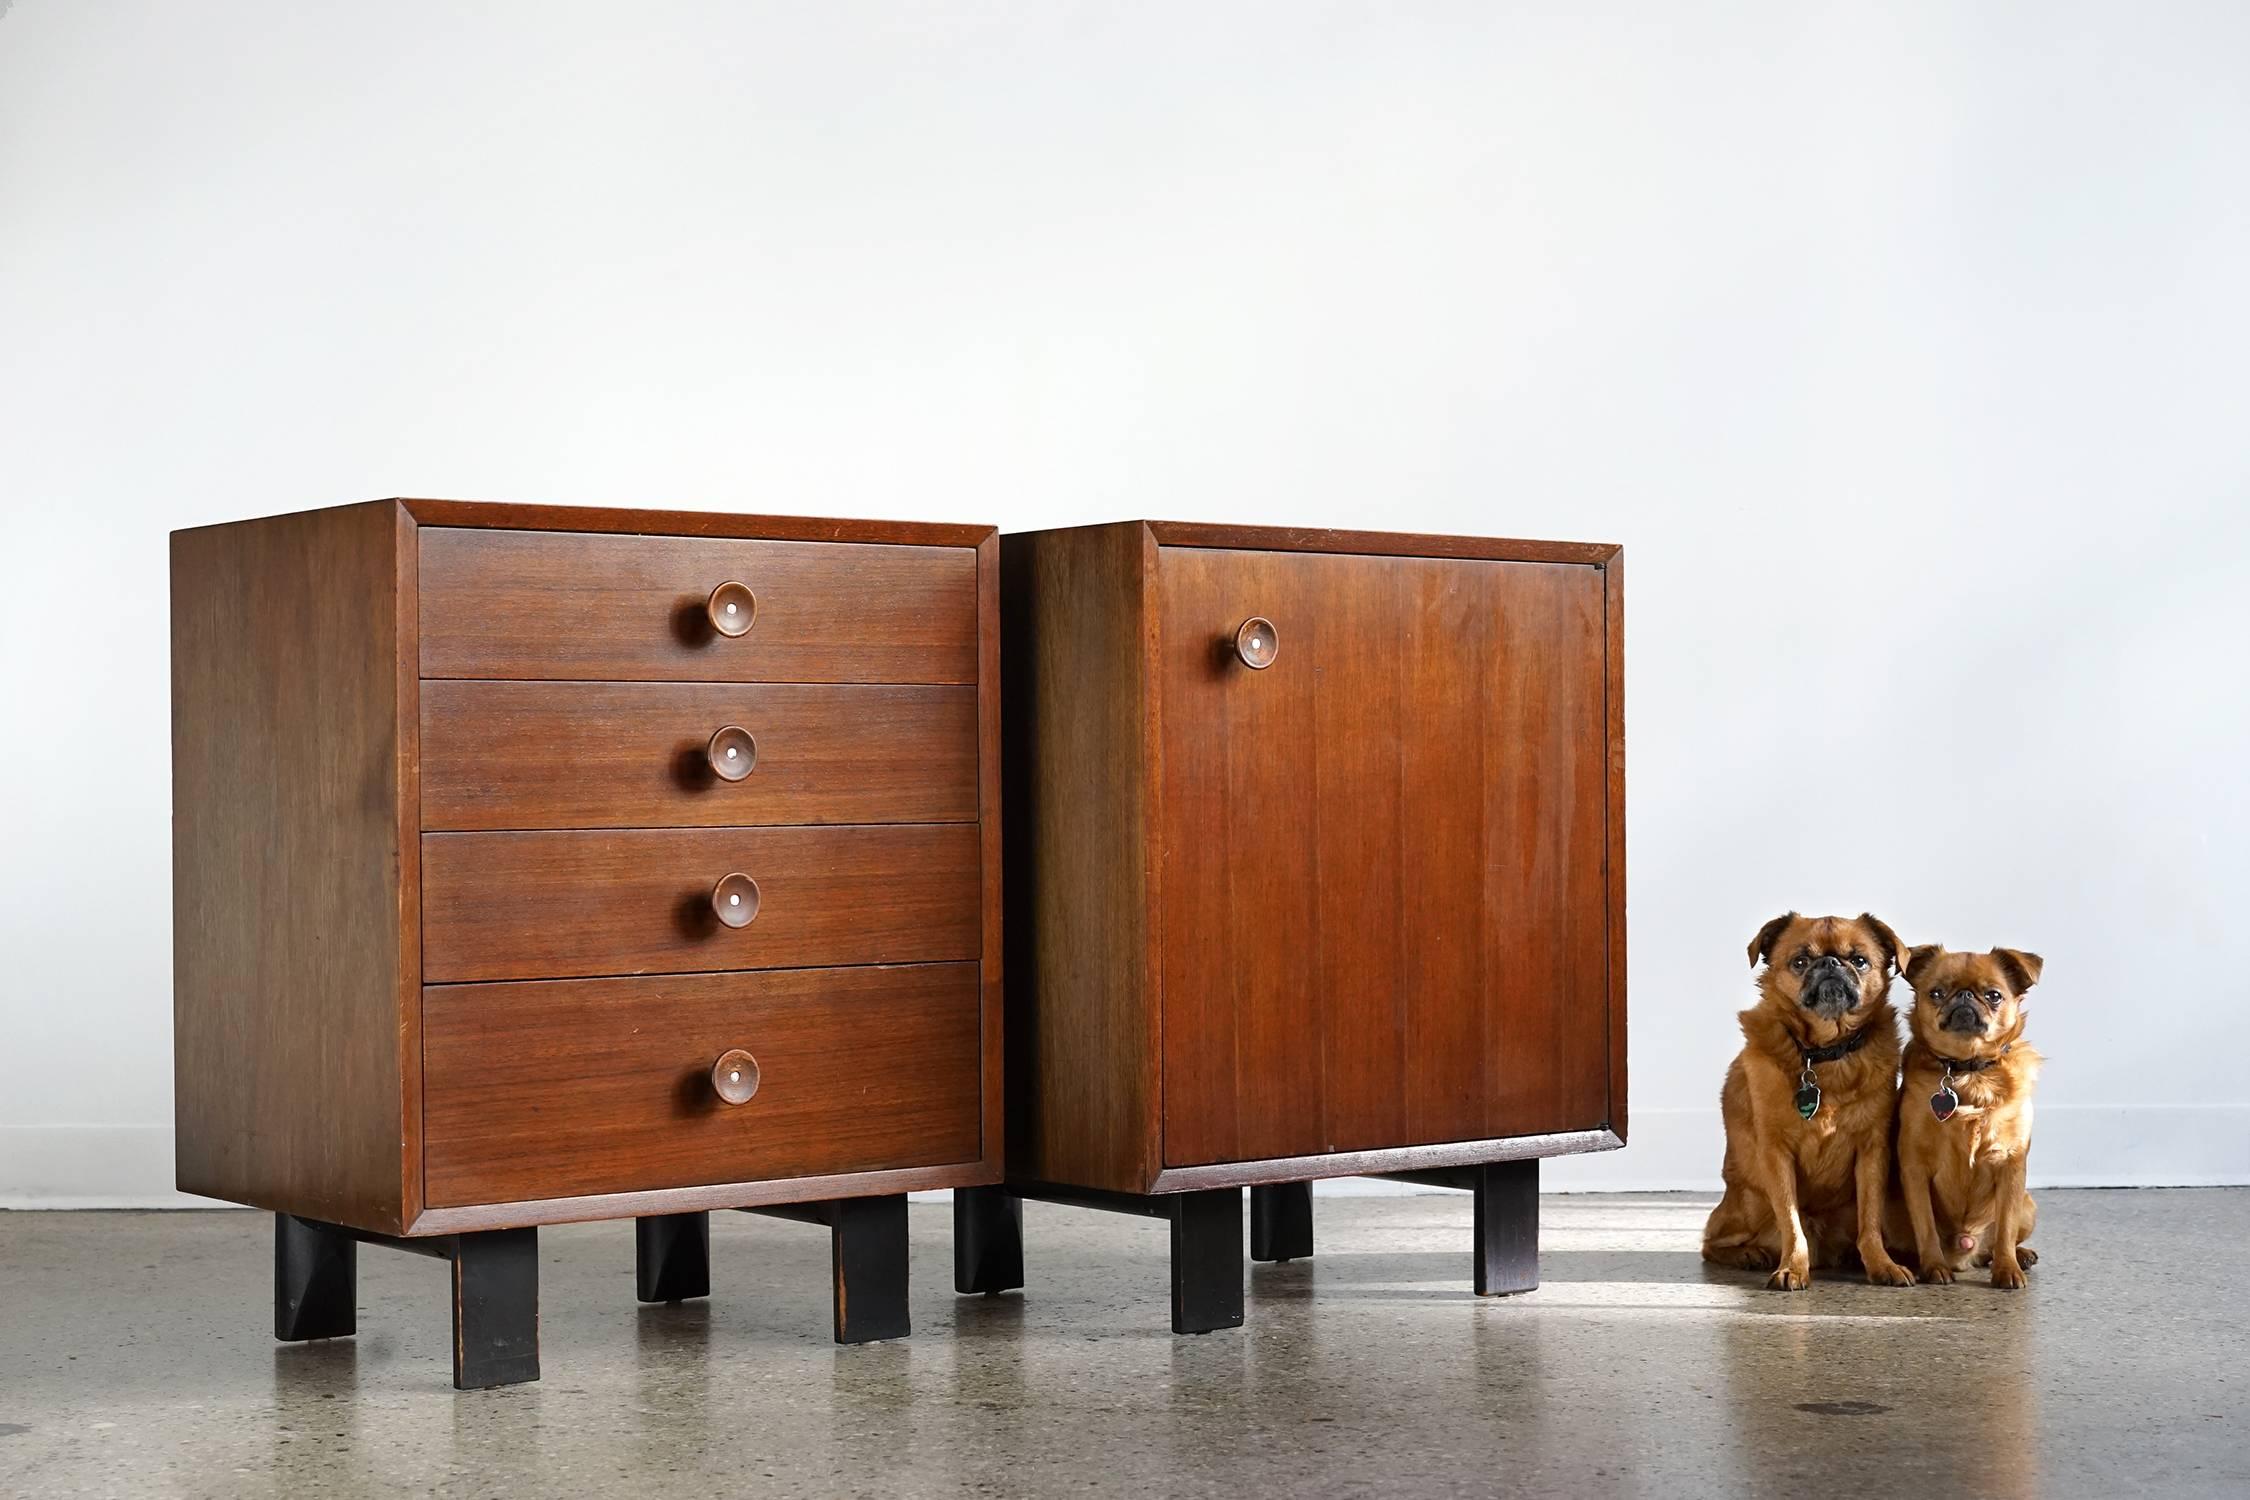 Handsome, versatile pair in all original vintage condition with rich tone and natural patina. Distinctive "cupcake" pulls, walnut veneer, ebonized legs, four drawers, one adjustable shelf, original finish. Label inside top drawer. Made in